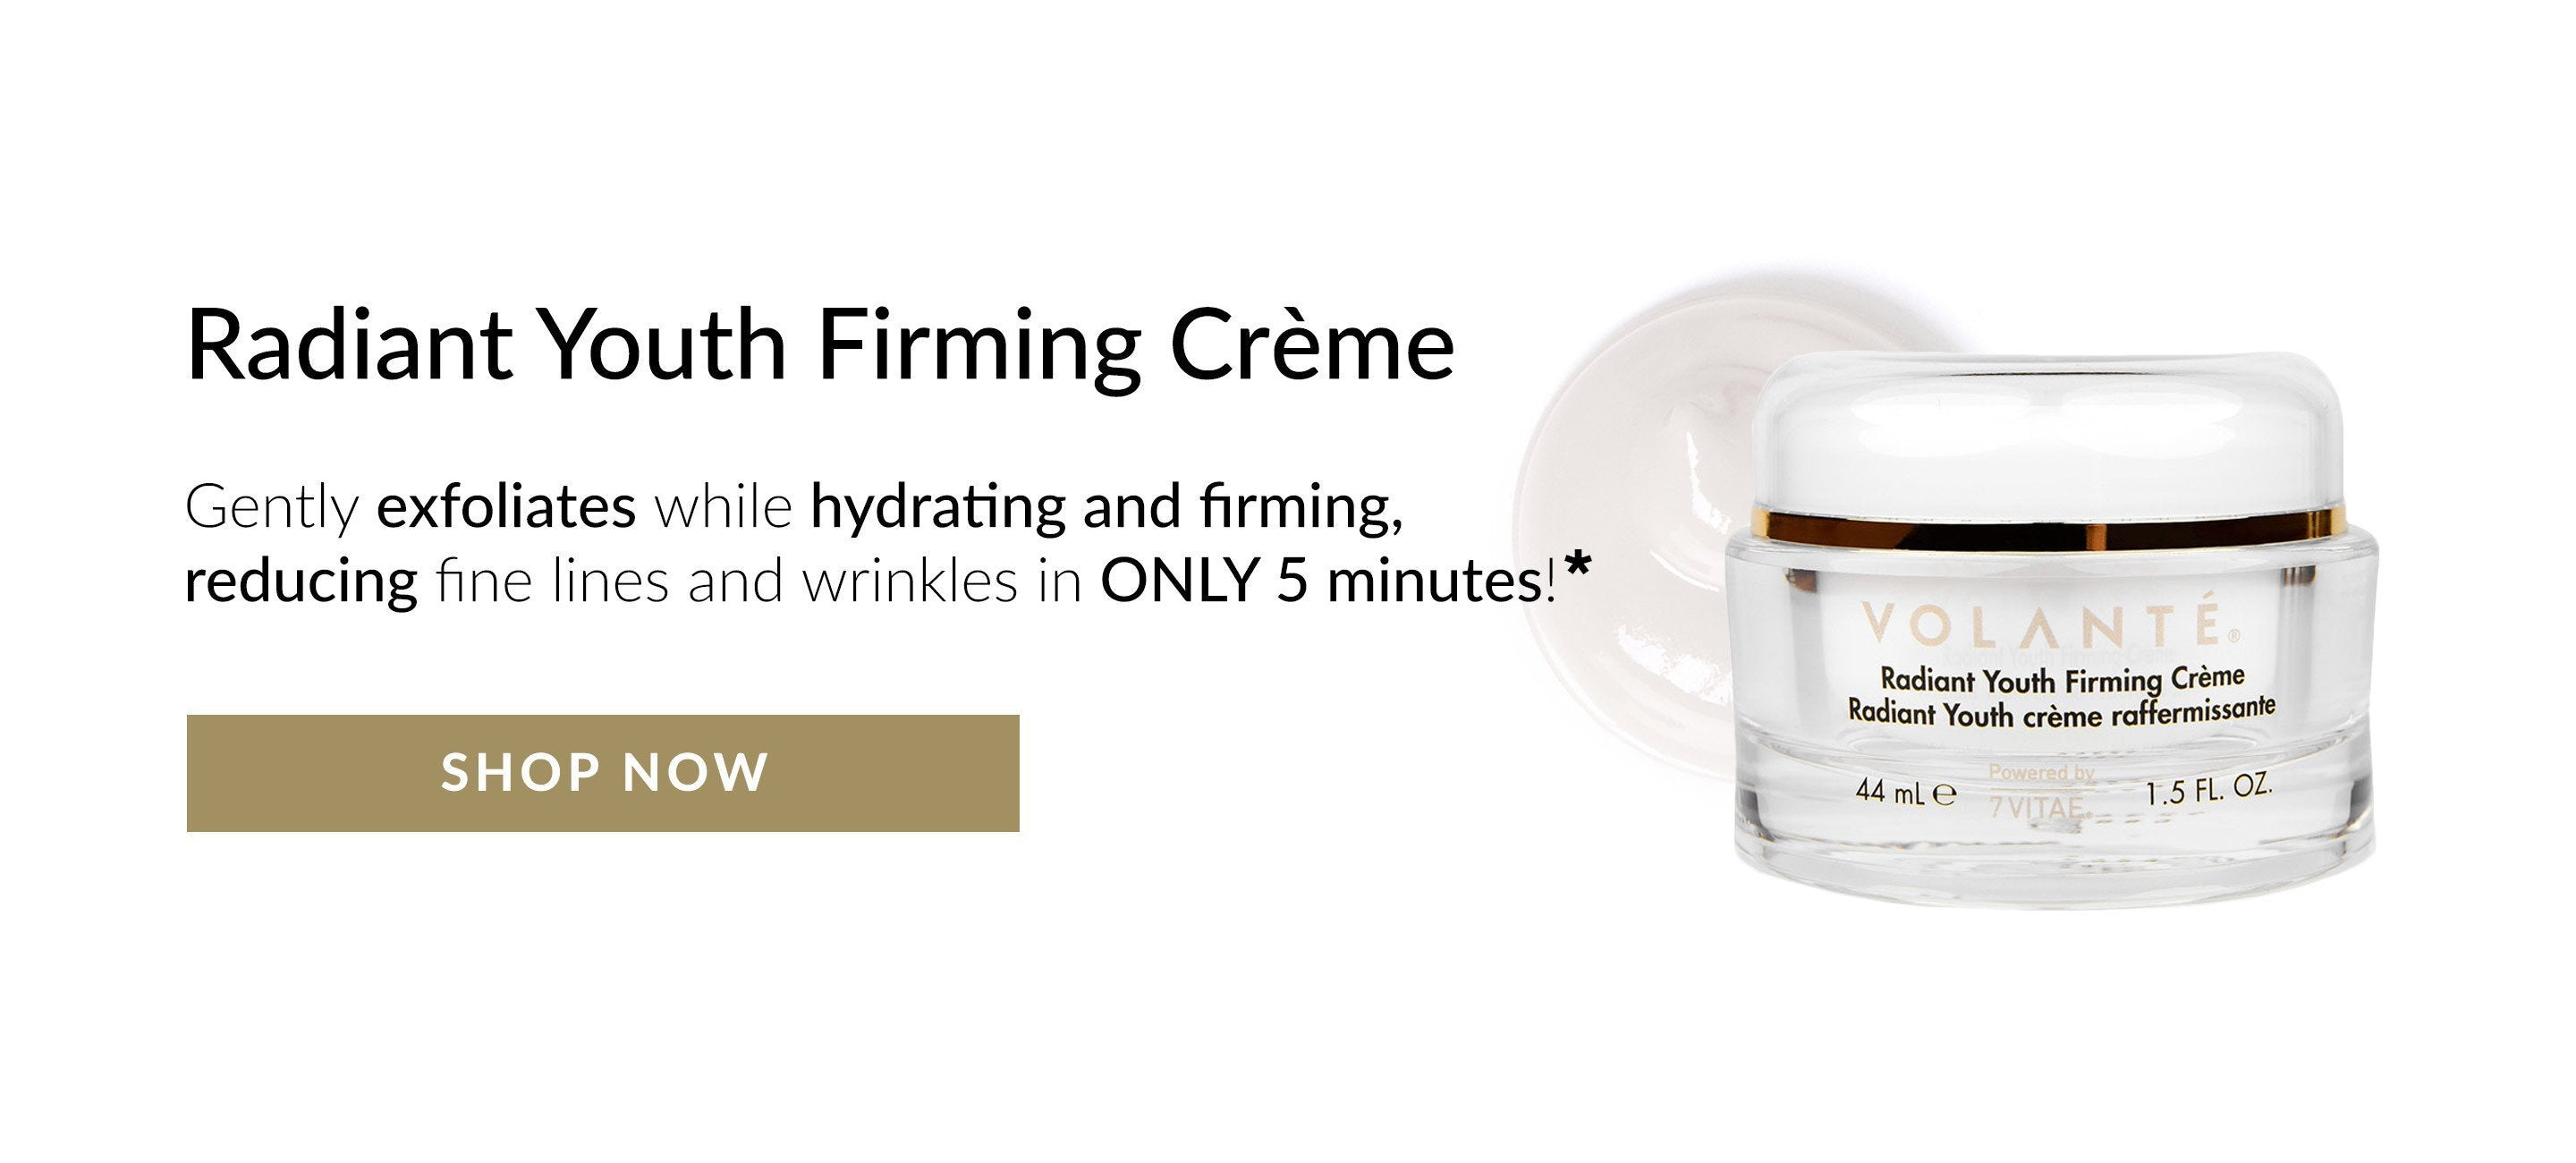 Radiant Youth Firming Creme